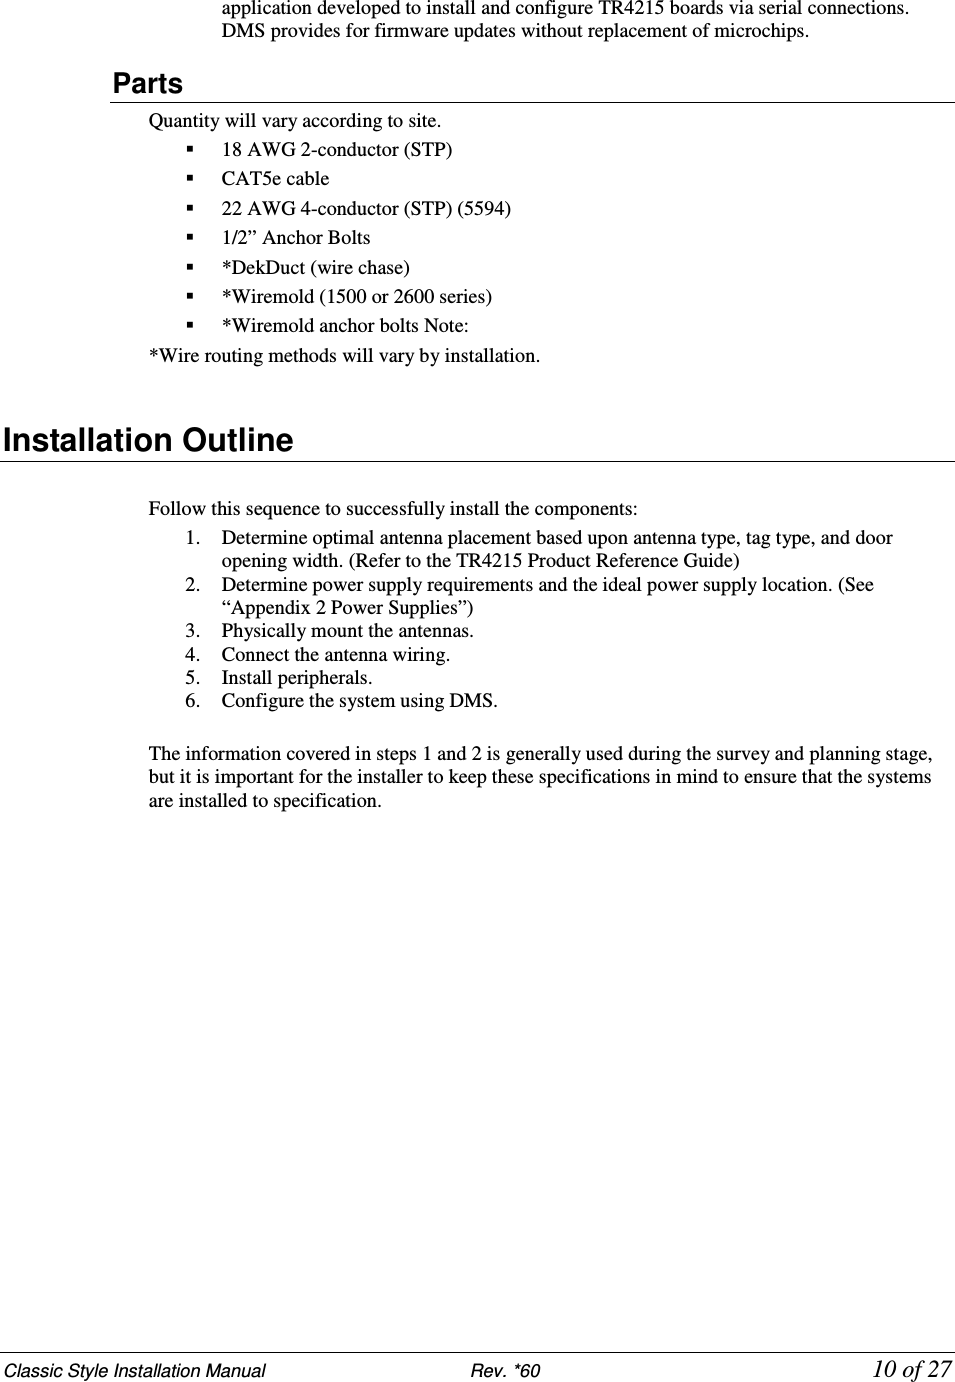 Classic Style Installation Manual                           Rev. *60           10 of 27 application developed to install and configure TR4215 boards via serial connections. DMS provides for firmware updates without replacement of microchips. Parts Quantity will vary according to site.  18 AWG 2-conductor (STP)  CAT5e cable  22 AWG 4-conductor (STP) (5594)   1/2” Anchor Bolts  *DekDuct (wire chase)  *Wiremold (1500 or 2600 series)  *Wiremold anchor bolts Note:  *Wire routing methods will vary by installation.  Installation Outline   Follow this sequence to successfully install the components:  1. Determine optimal antenna placement based upon antenna type, tag type, and door opening width. (Refer to the TR4215 Product Reference Guide) 2. Determine power supply requirements and the ideal power supply location. (See “Appendix 2 Power Supplies”)  3. Physically mount the antennas.  4. Connect the antenna wiring. 5. Install peripherals.  6. Configure the system using DMS.  The information covered in steps 1 and 2 is generally used during the survey and planning stage, but it is important for the installer to keep these specifications in mind to ensure that the systems are installed to specification.   